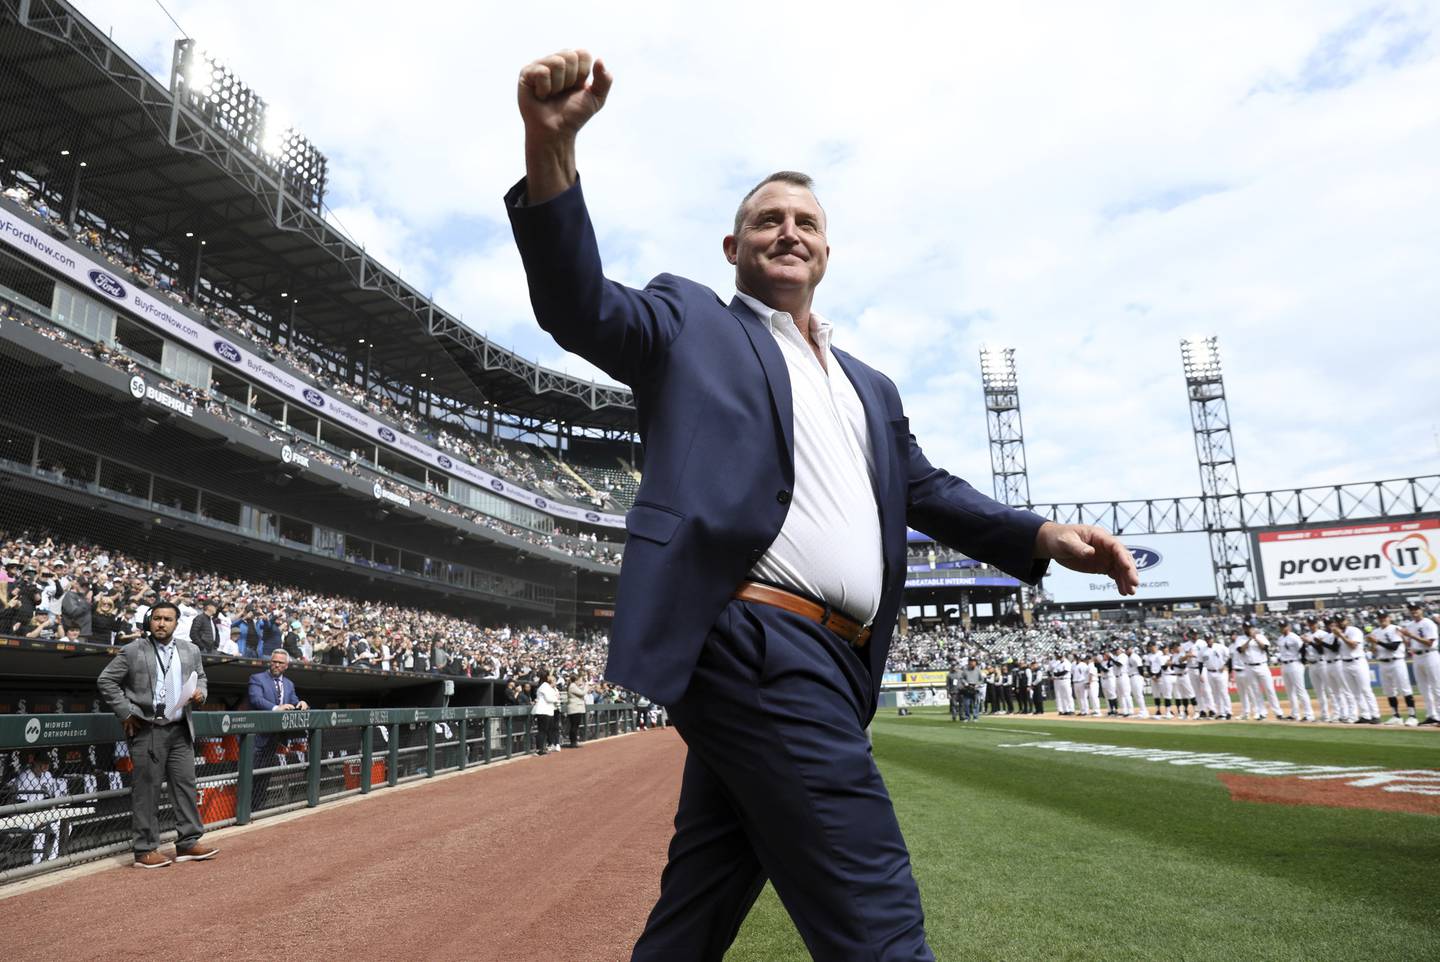 Former White Sox player Jim Thome is introduced before the start of a game at Guaranteed Rate Field on April 12, 2022.